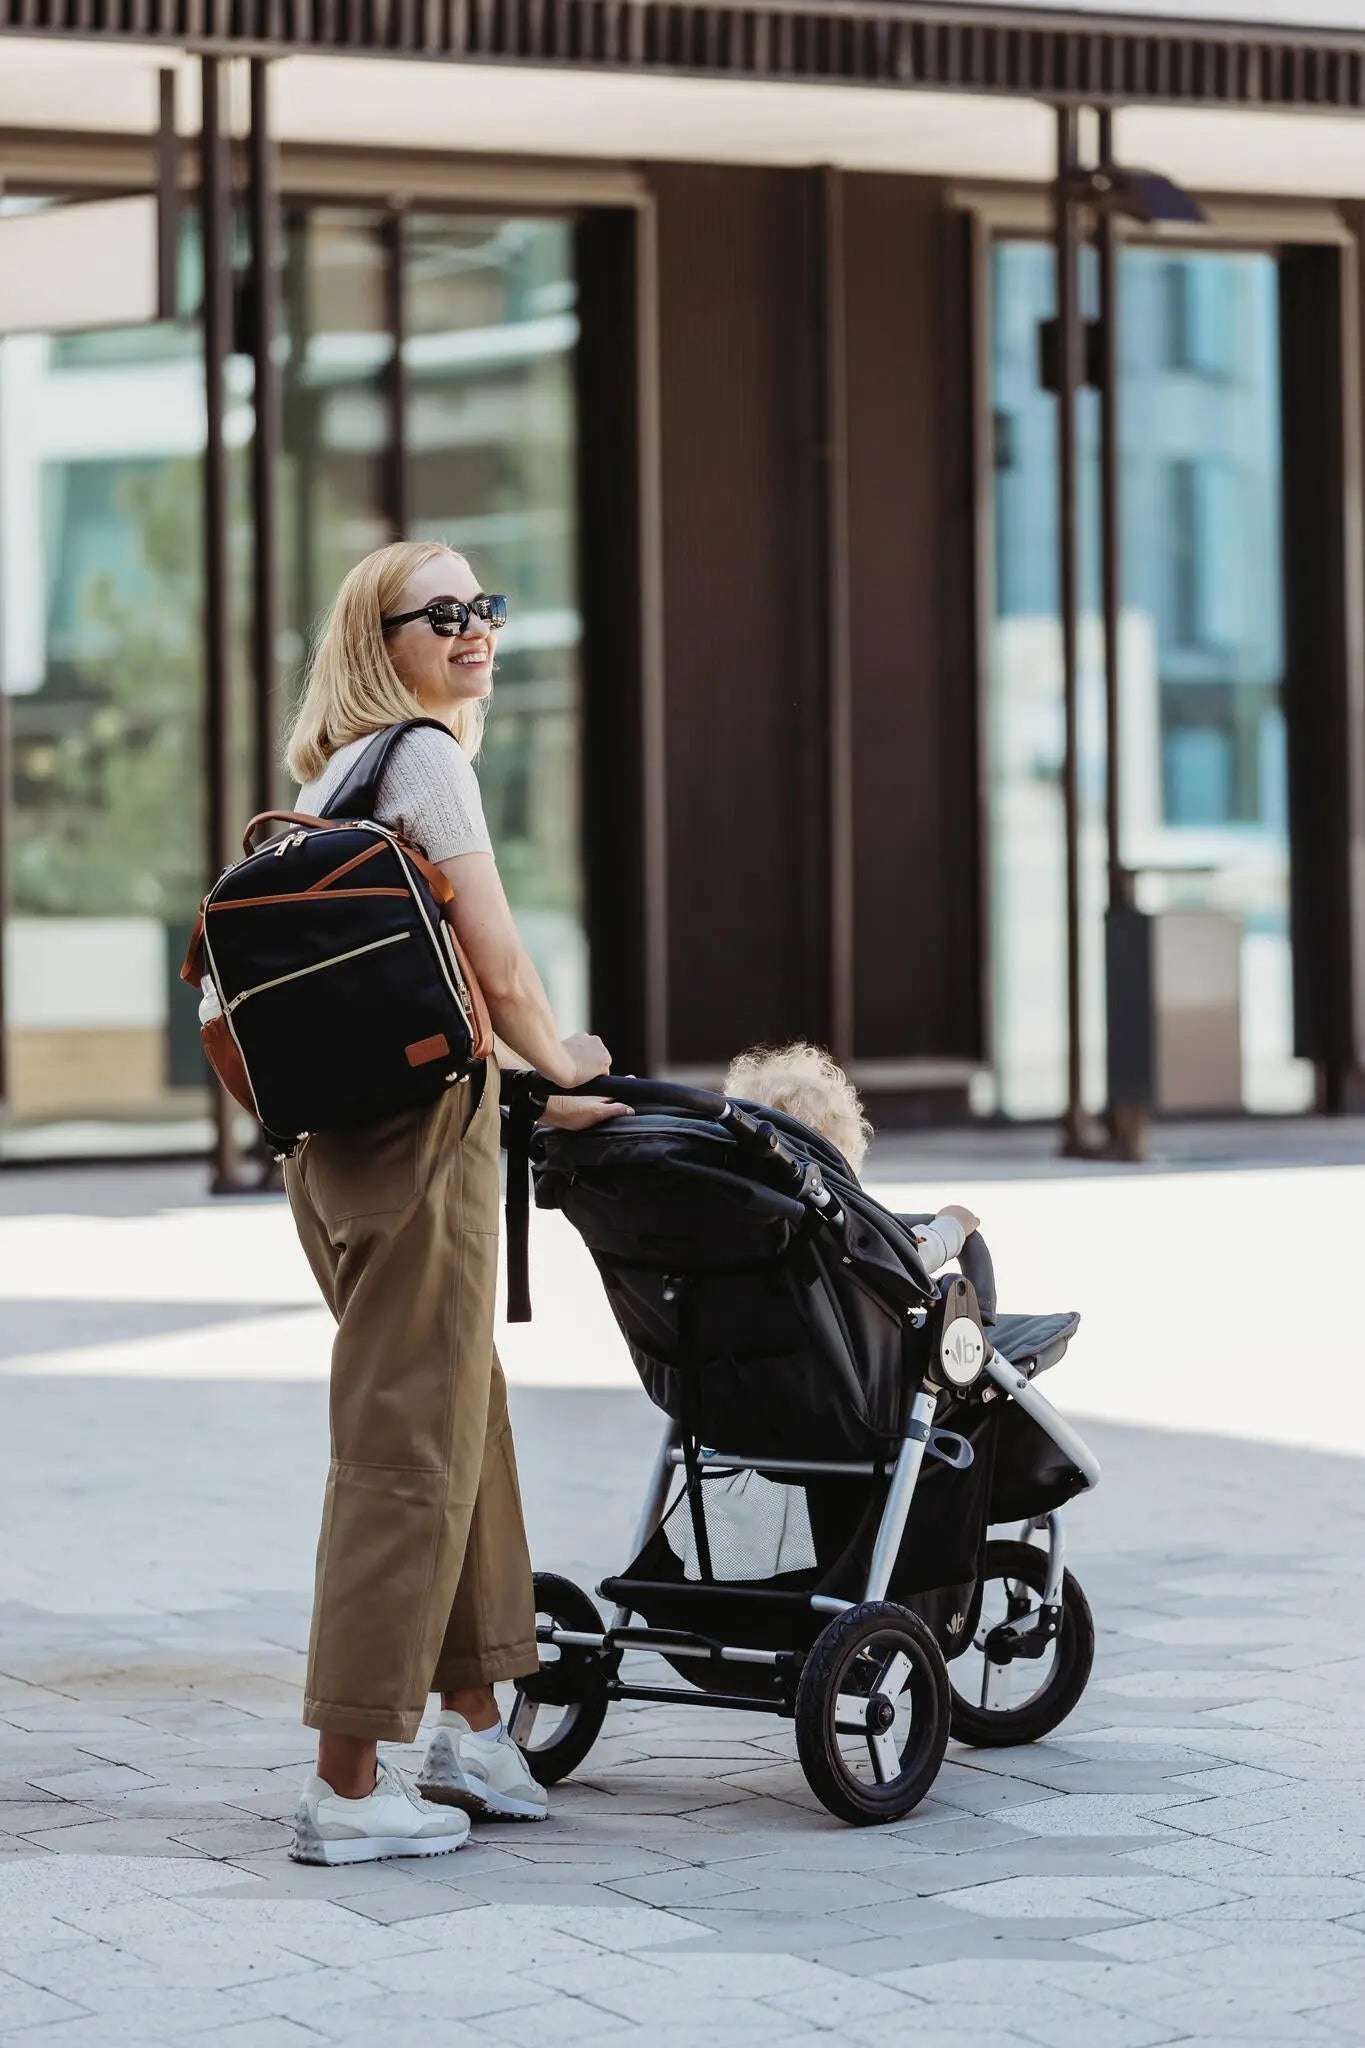 A woman pushing a stroller with a baby, carrying a backpack and bag. Small Diaper Backpack – Black Coffee by Ally Scandic, designed for style, organization, and convenience on the go.